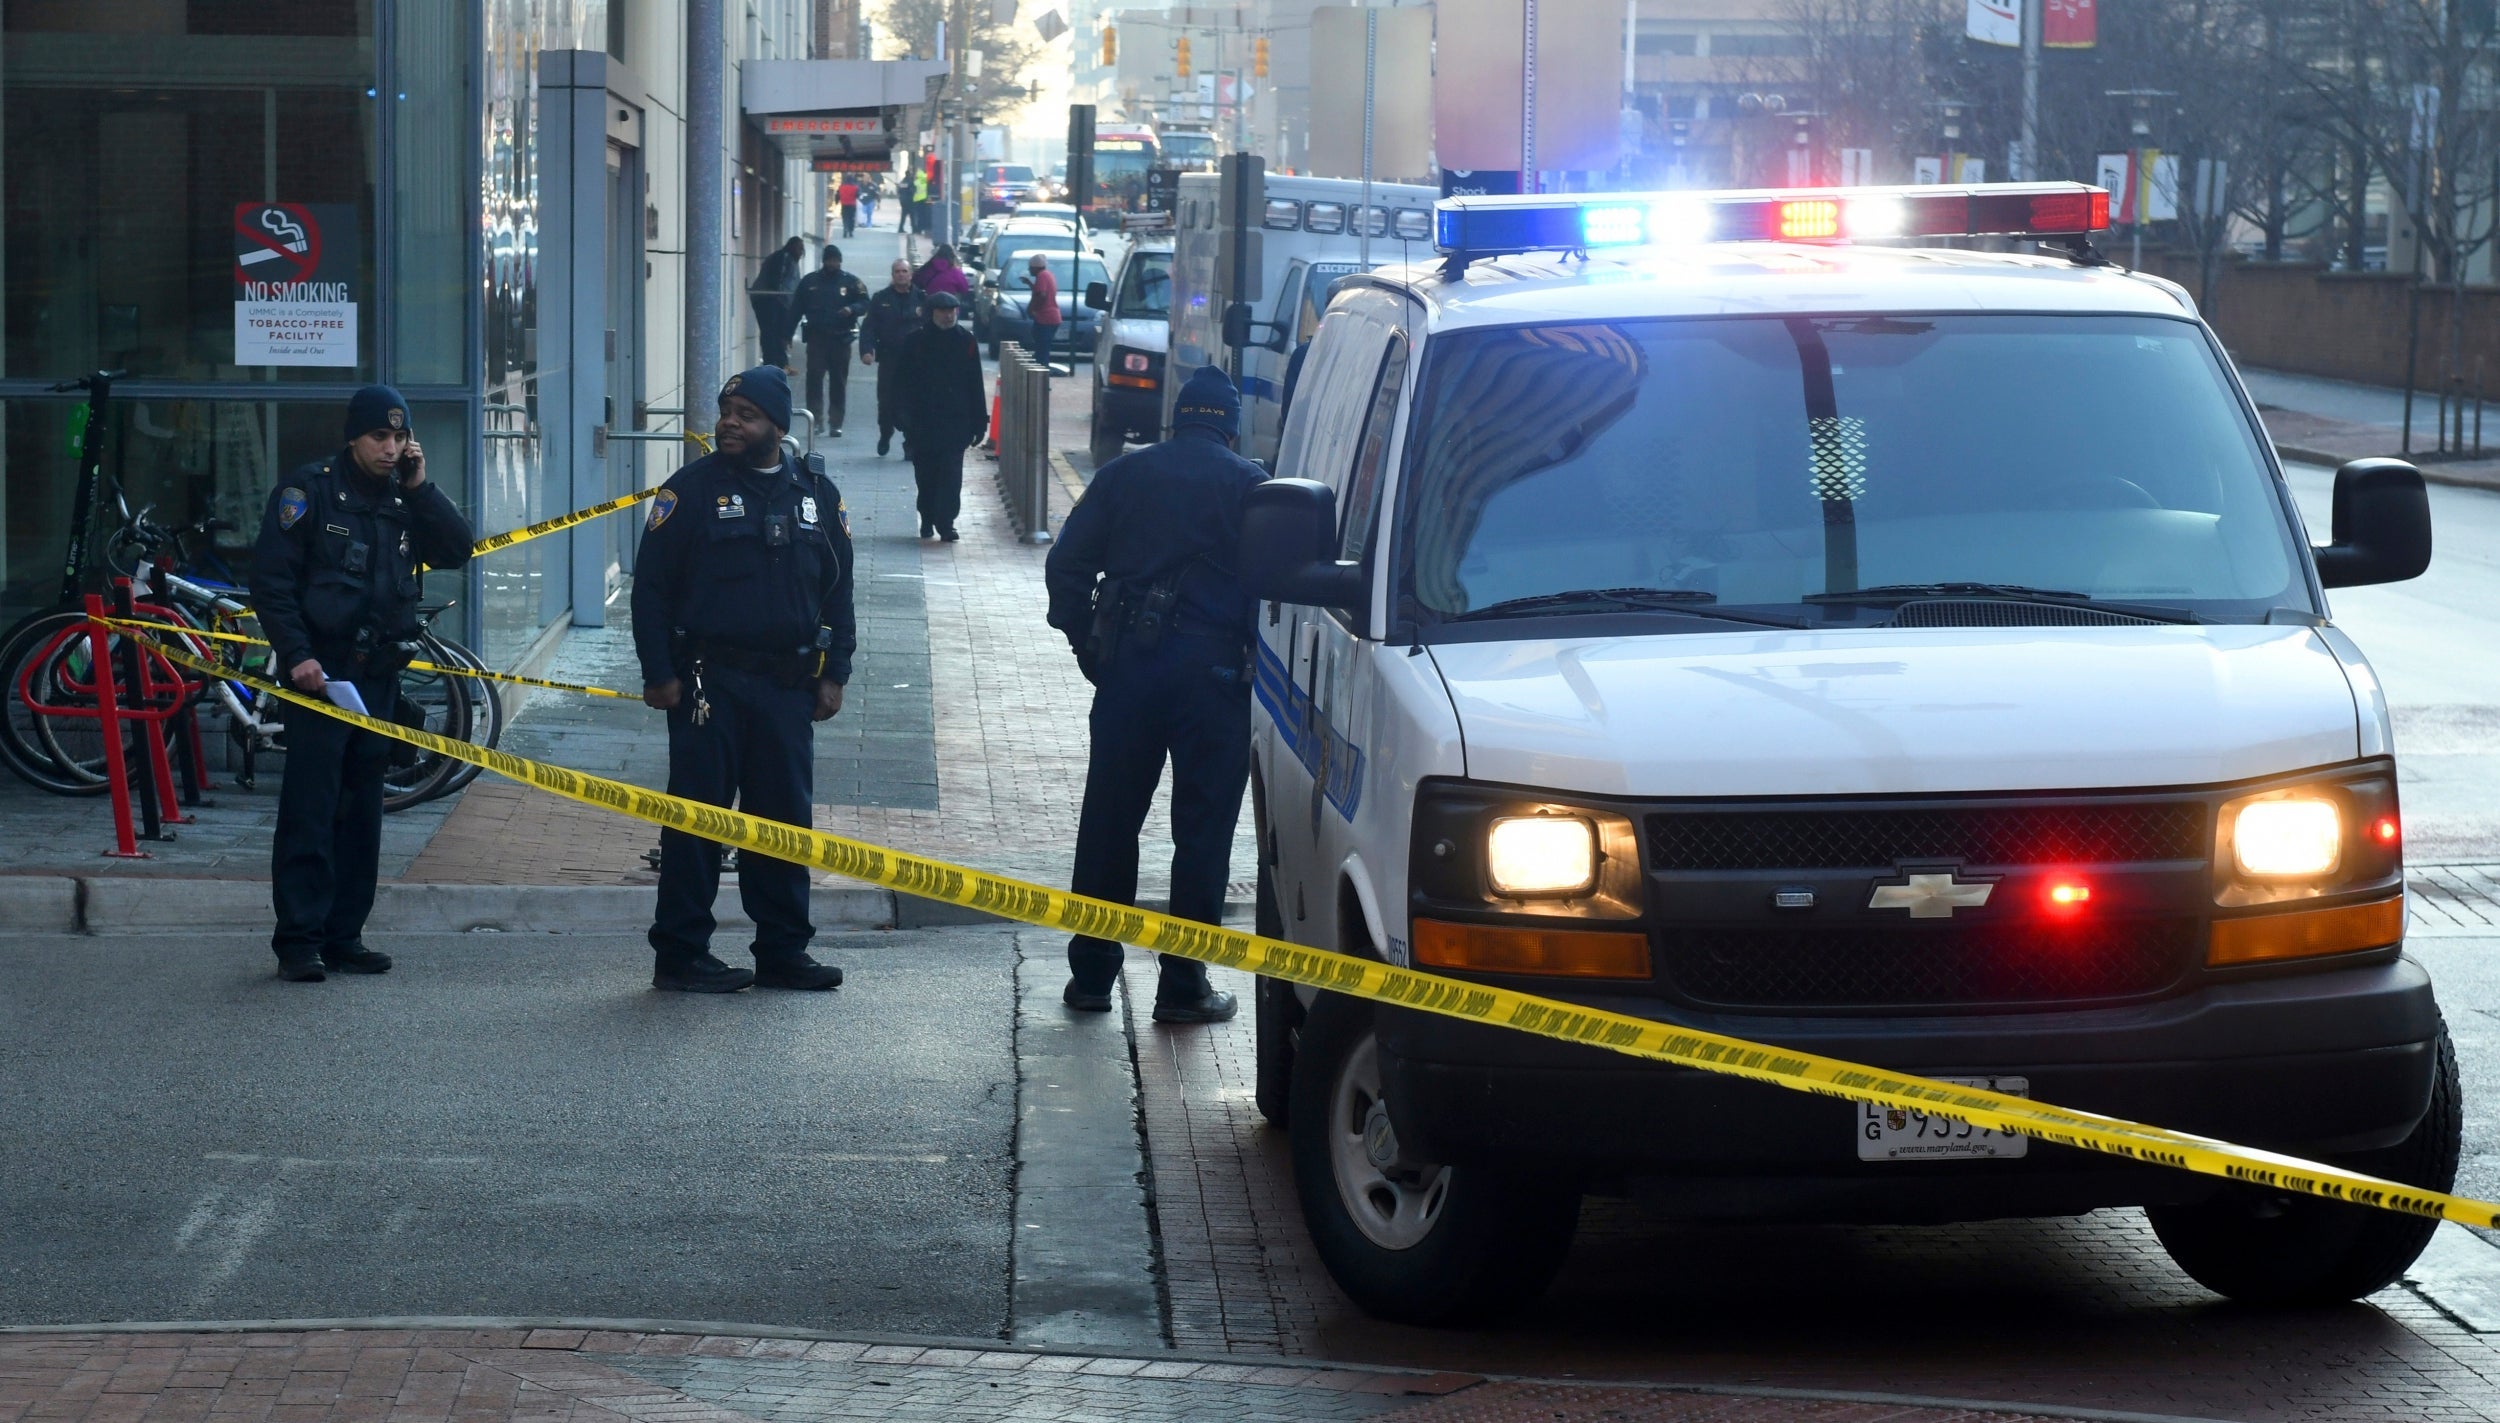 Police in Baltimore at the scene of a shooting near an ambulance bay at the University of Maryland Medical Centre in February 2019